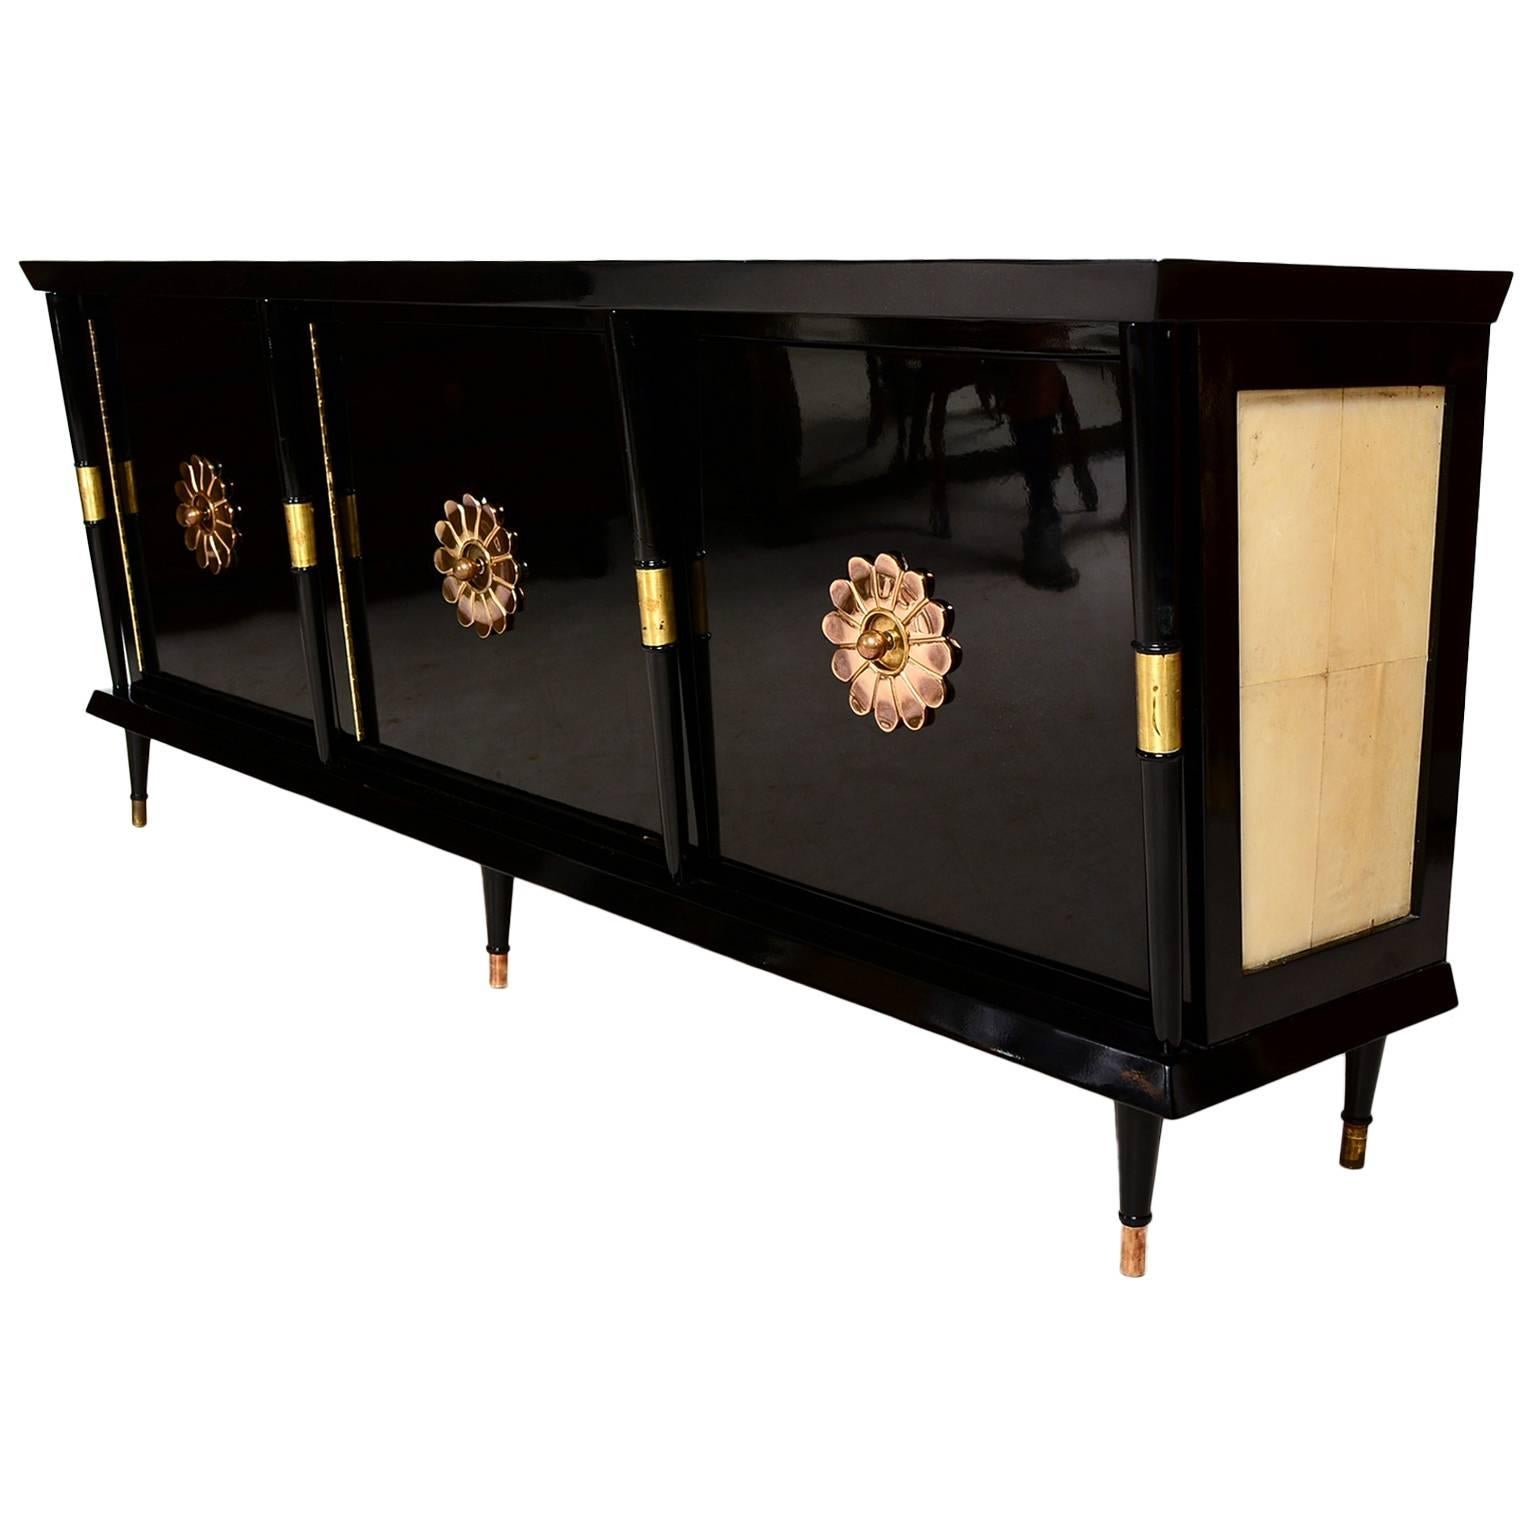 Mexican Modernist Credenza in Black Lacquer with Brass and Goatskin Accents